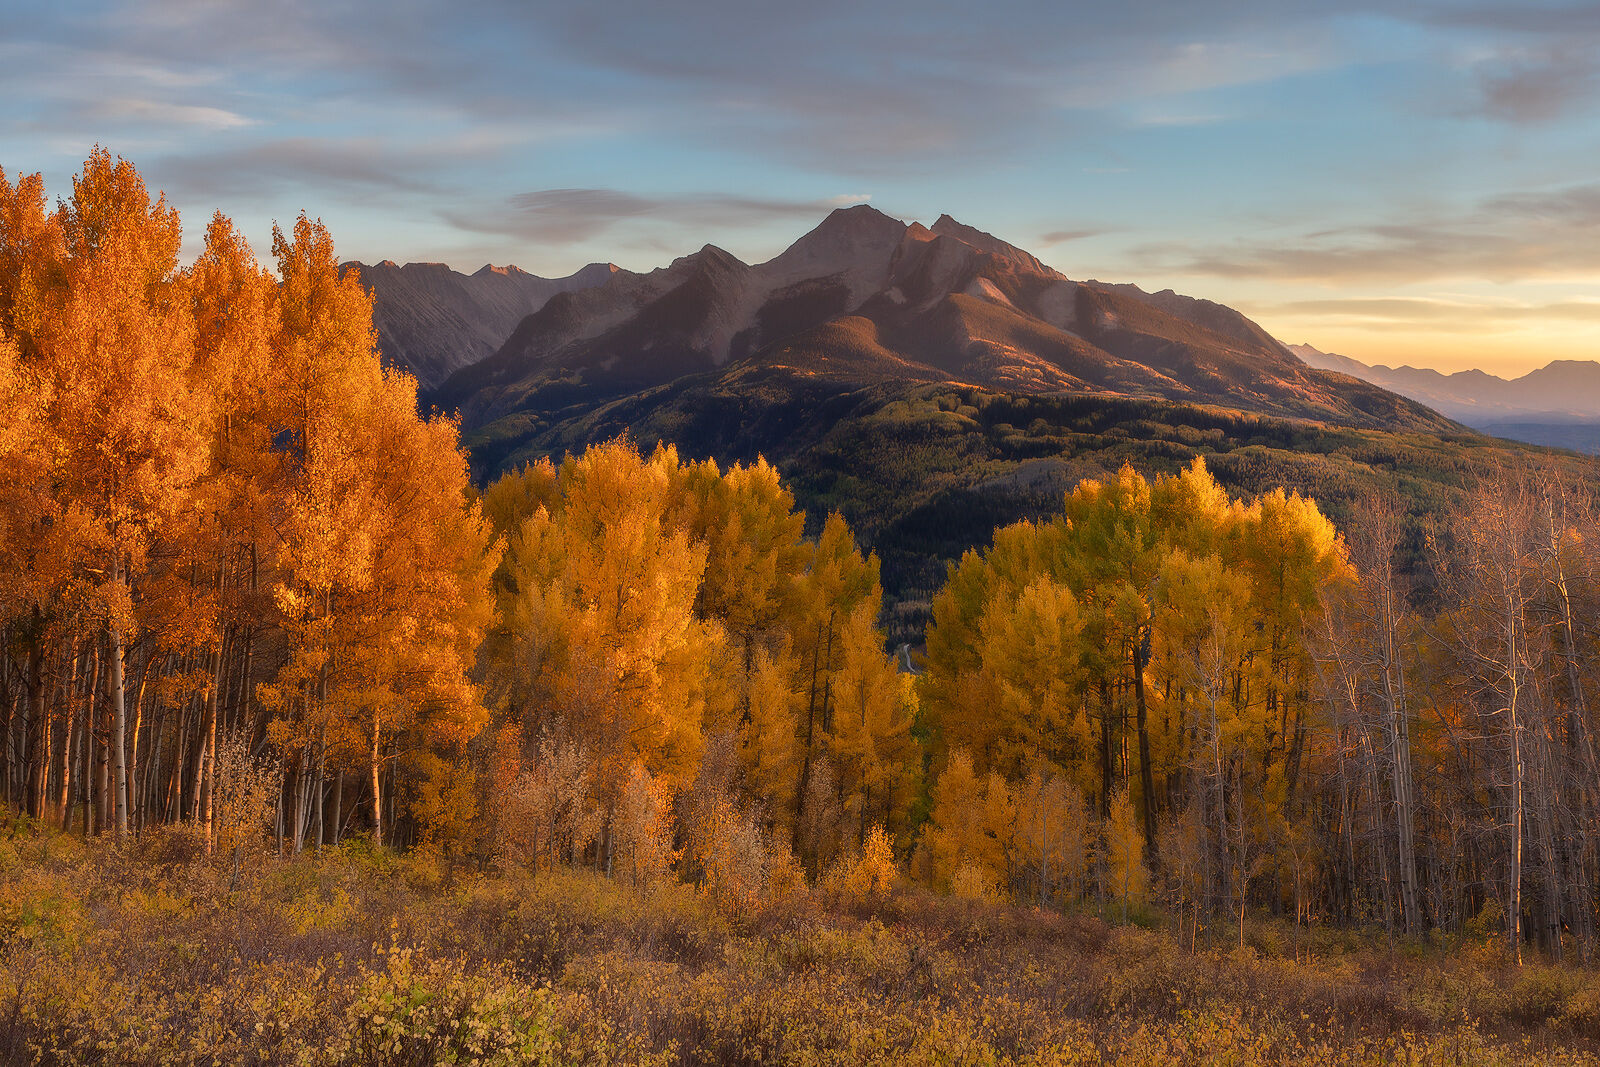 Mountains in the background are lit with sun and the gold leaves on the aspen trees in front of the mountains appear to glow.